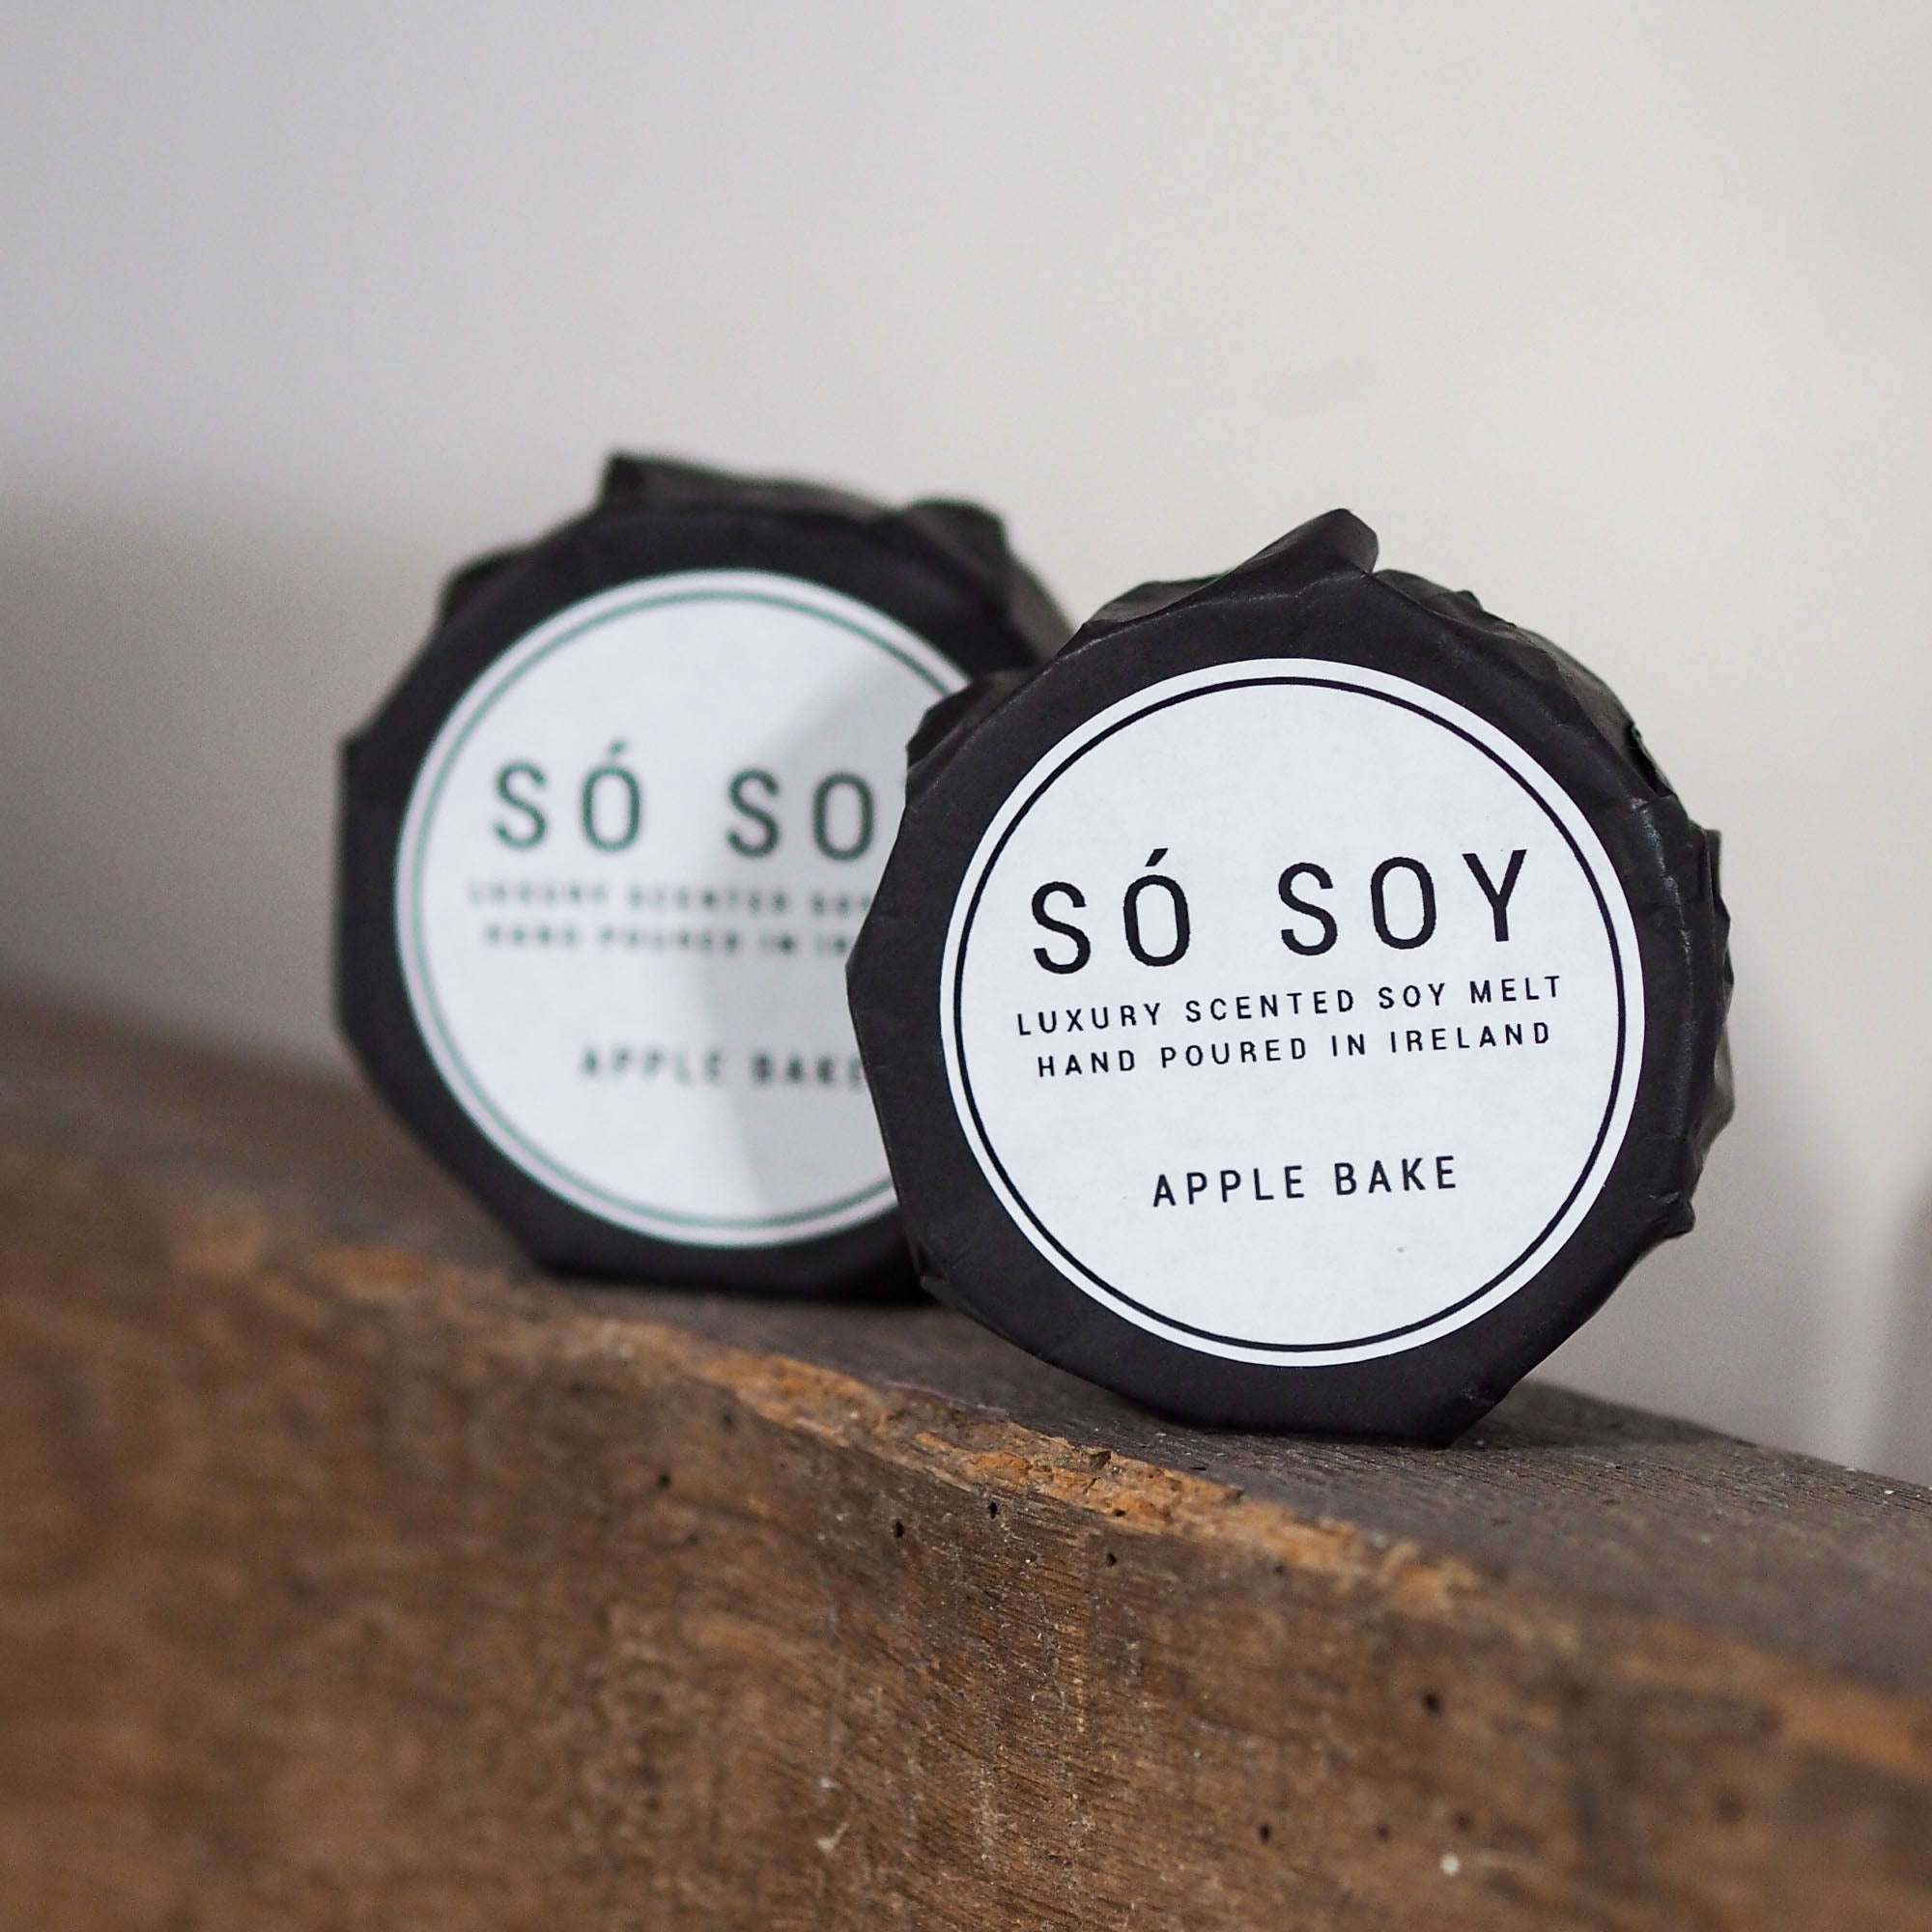 Apple Bake Soy Wax Melt by Só Soy Hand poured in Ballymoney